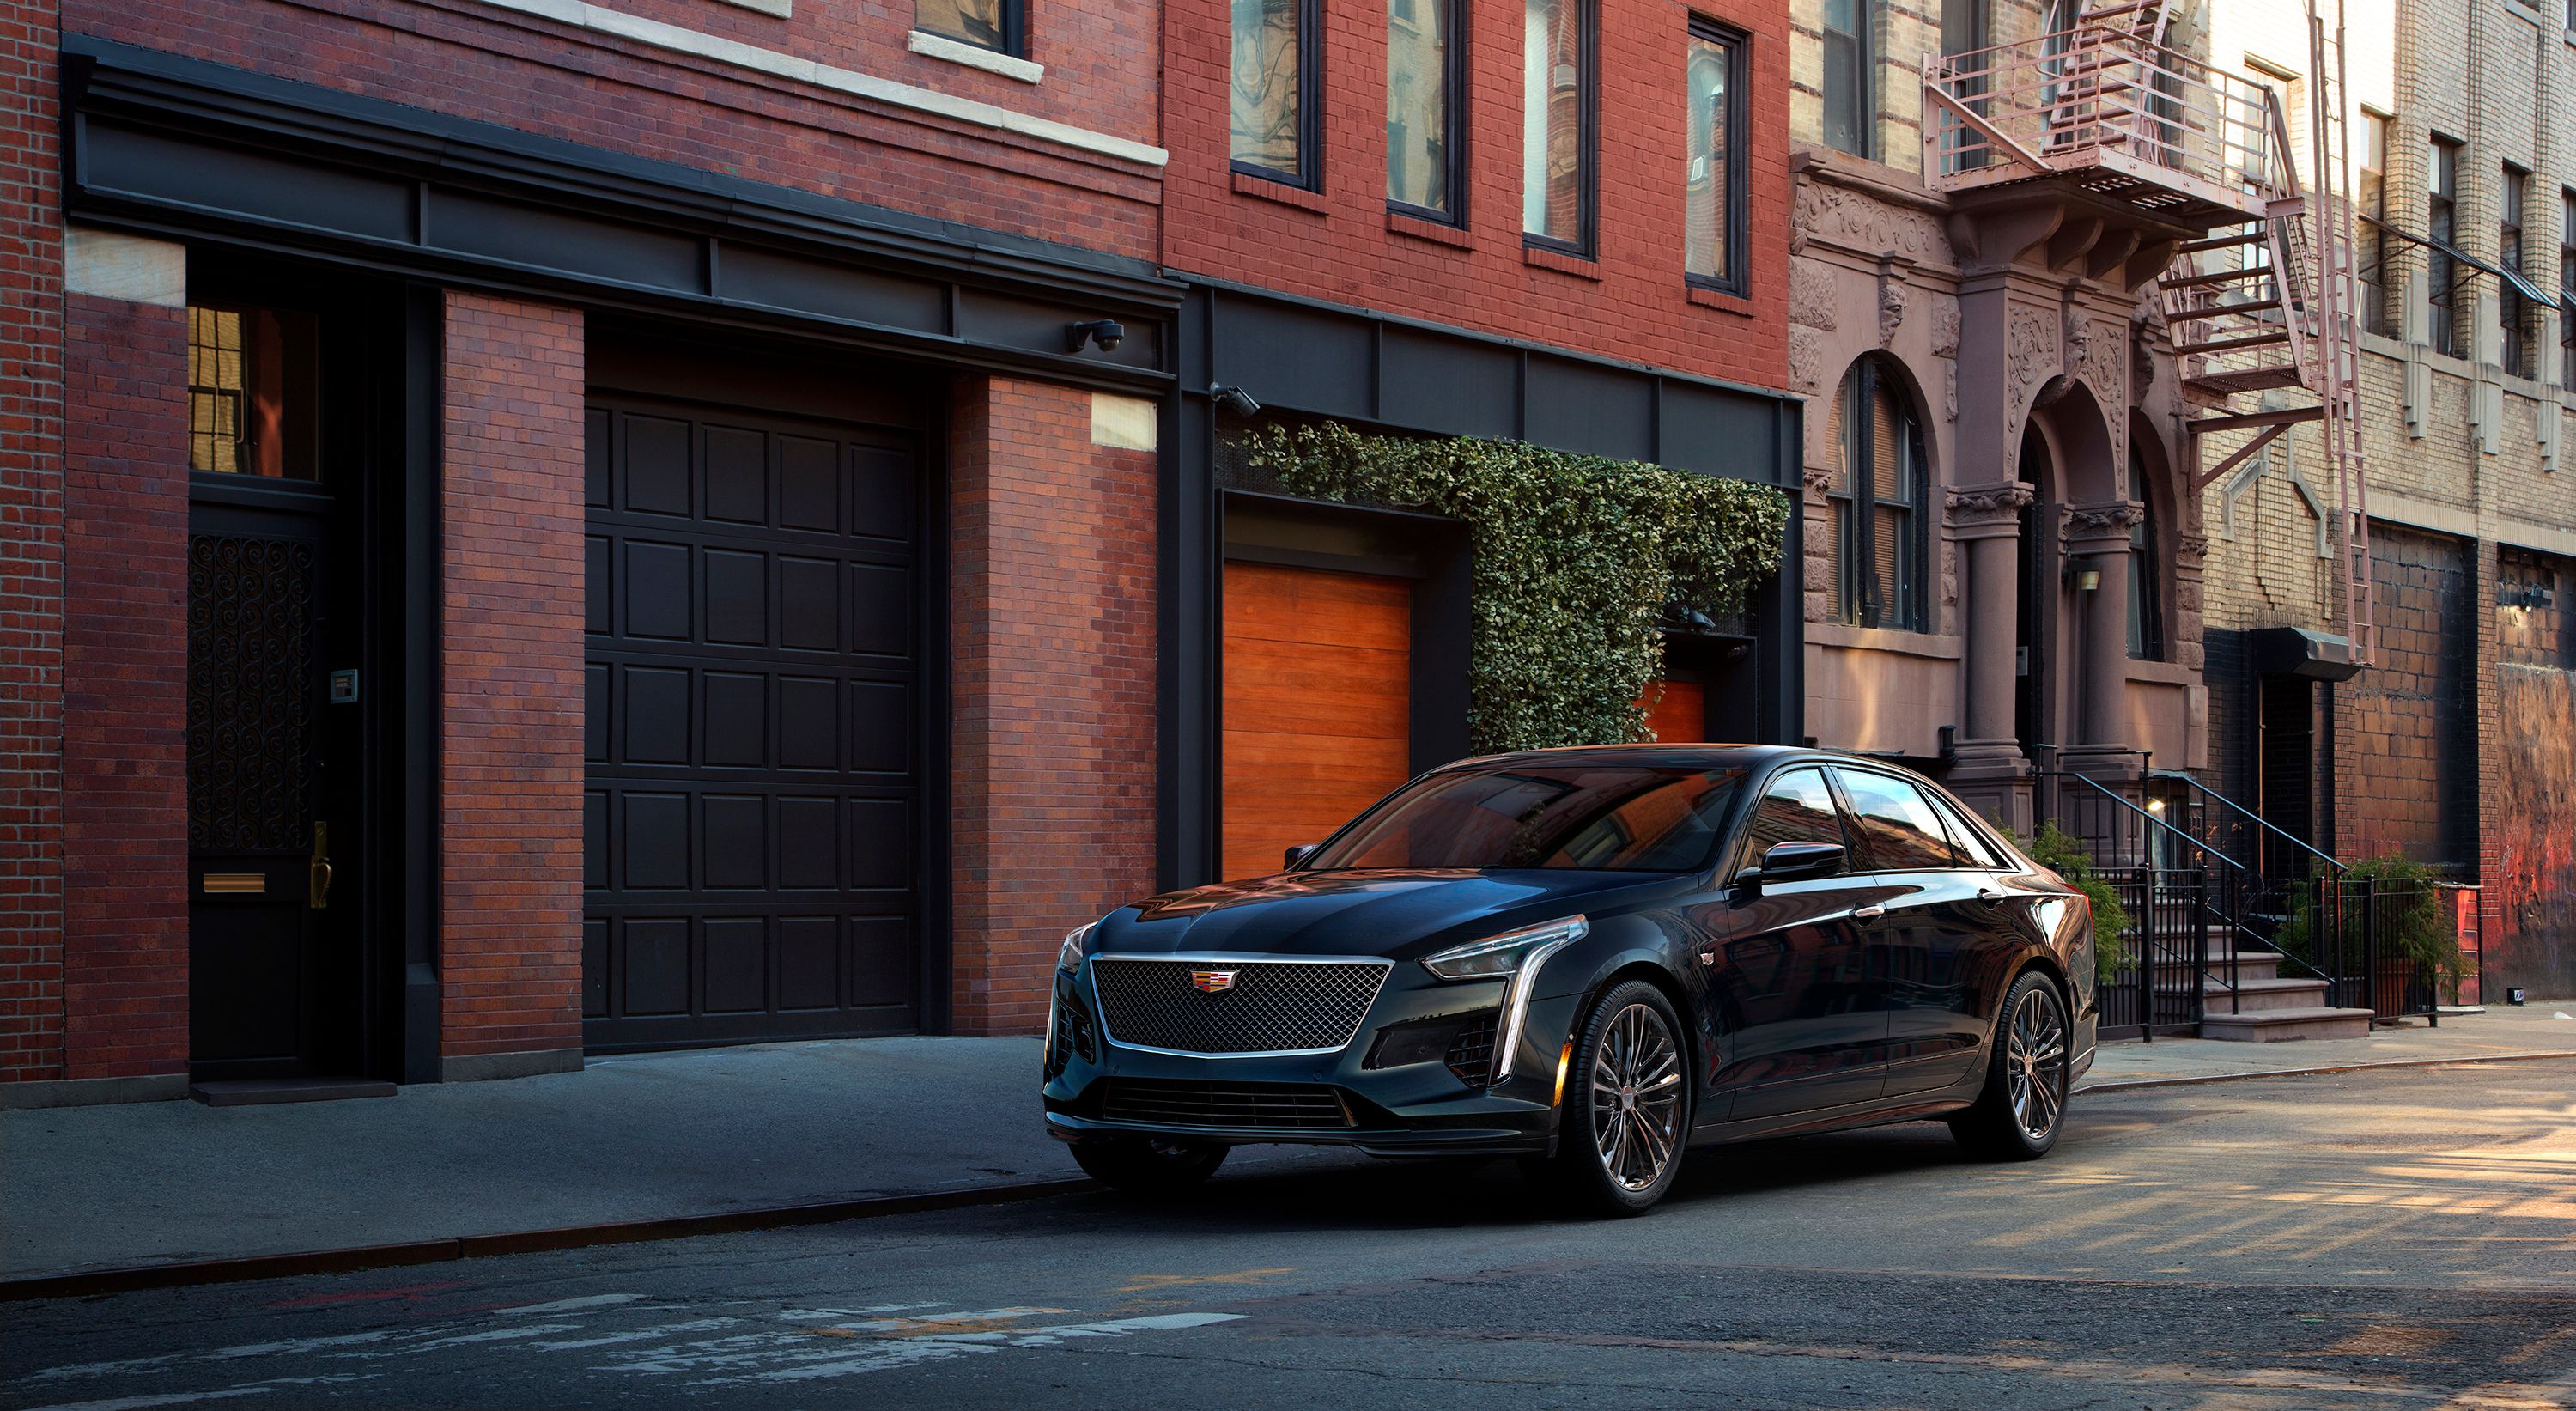 2019 Cadillac Proves Performance Sedans Aren't Dead as the 2019 CT6-V Sells Out in a Few Hours